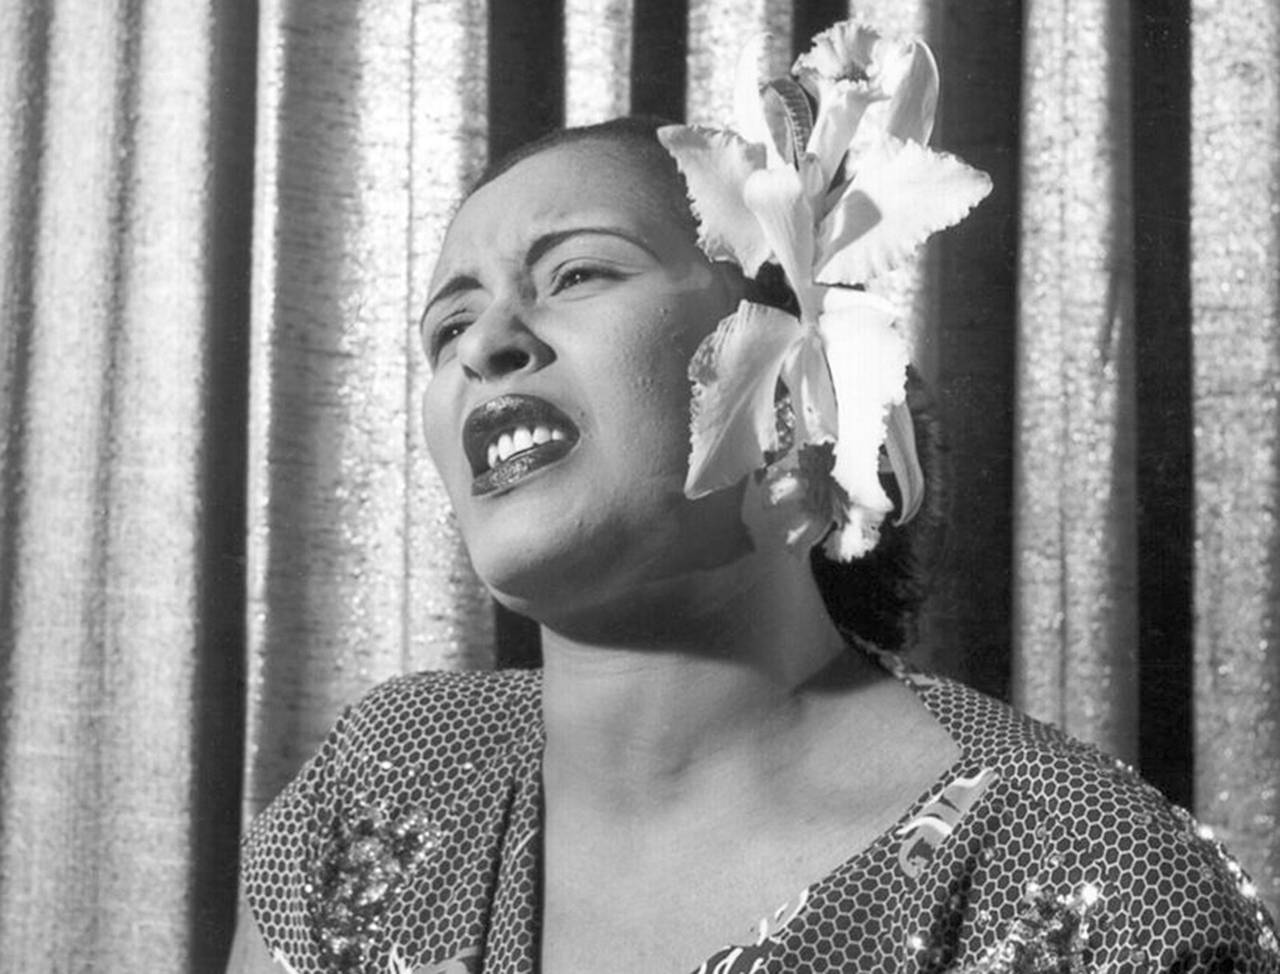 Hulton Archive | Getty Images                                American blues singer Billie Holiday (1915-1959) is among the musicians whose master recordings were destroyed in a 2008 fire at Universal Studios Hollywood, a loss long hidden from public knowledge.